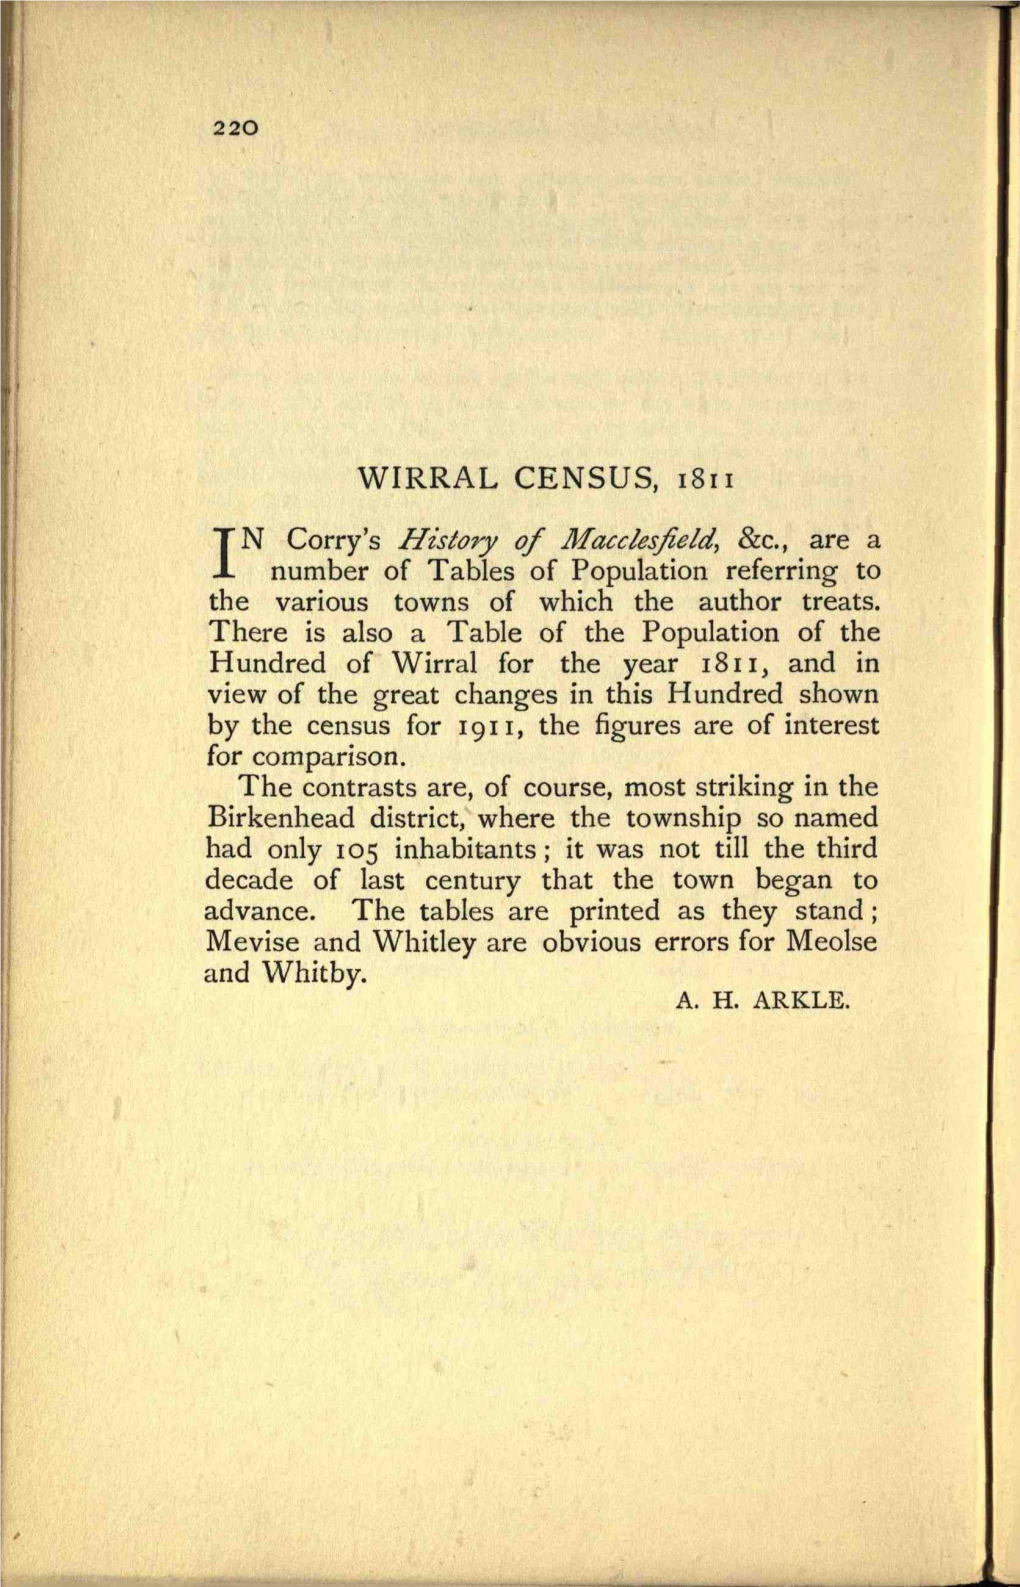 WIRRAL CENSUS, 1811 N Corry's History of Macclesfield, &C., Are a I Number of Tables of Population Referring to the Various Towns of Which the Author Treats